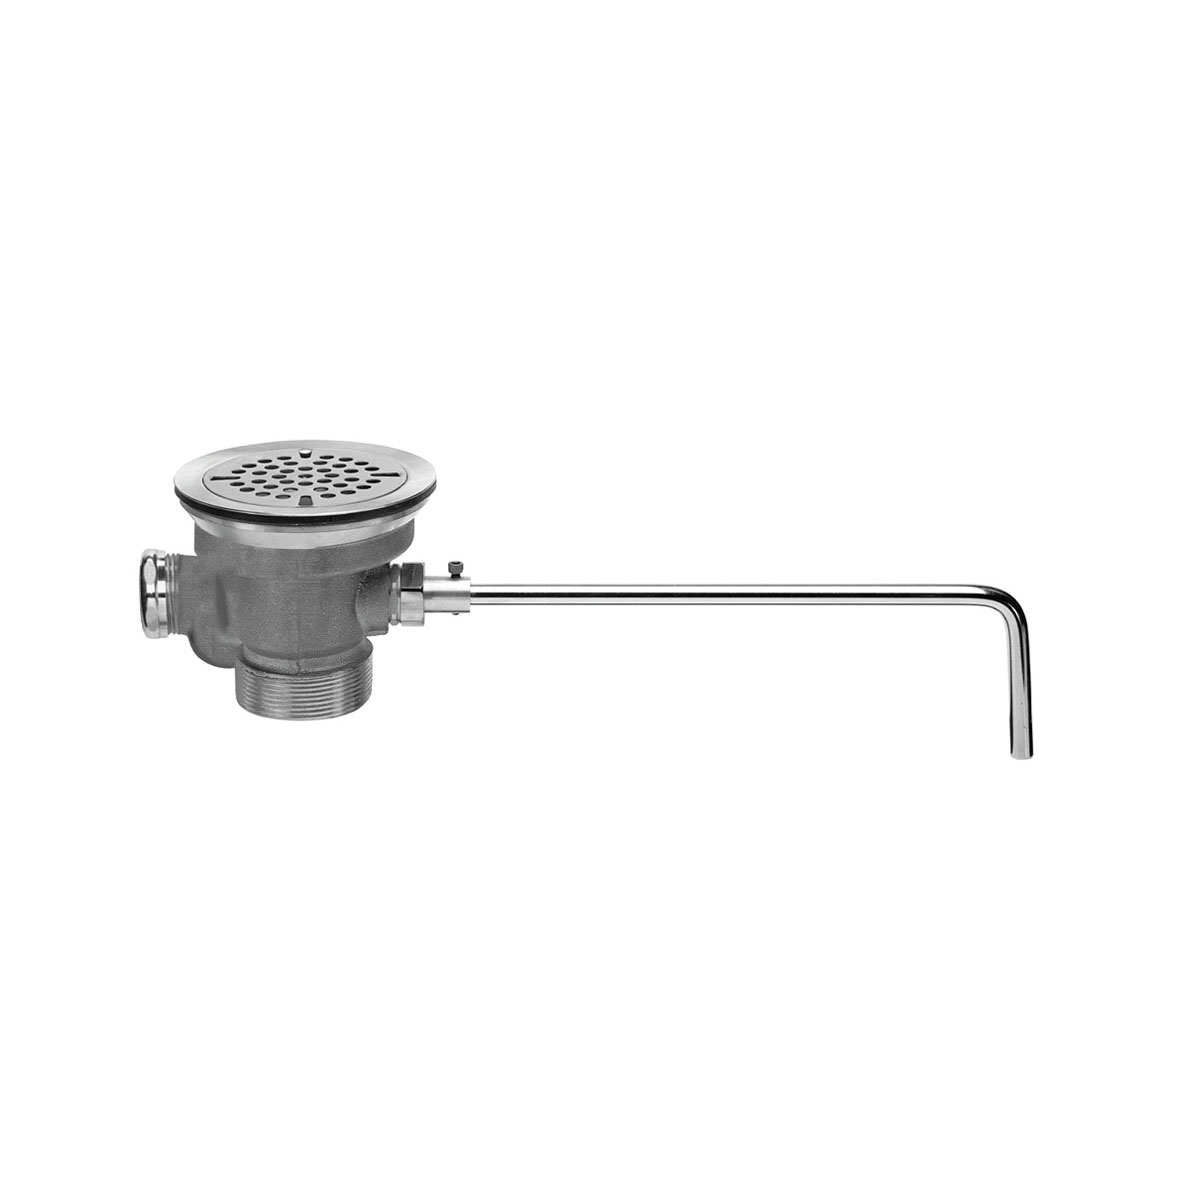 Fisher DrainKing™ 22438 Waste Valve With Port and Overflow Body, 1-1/2 x 2 in, Cast Red Brass Drain